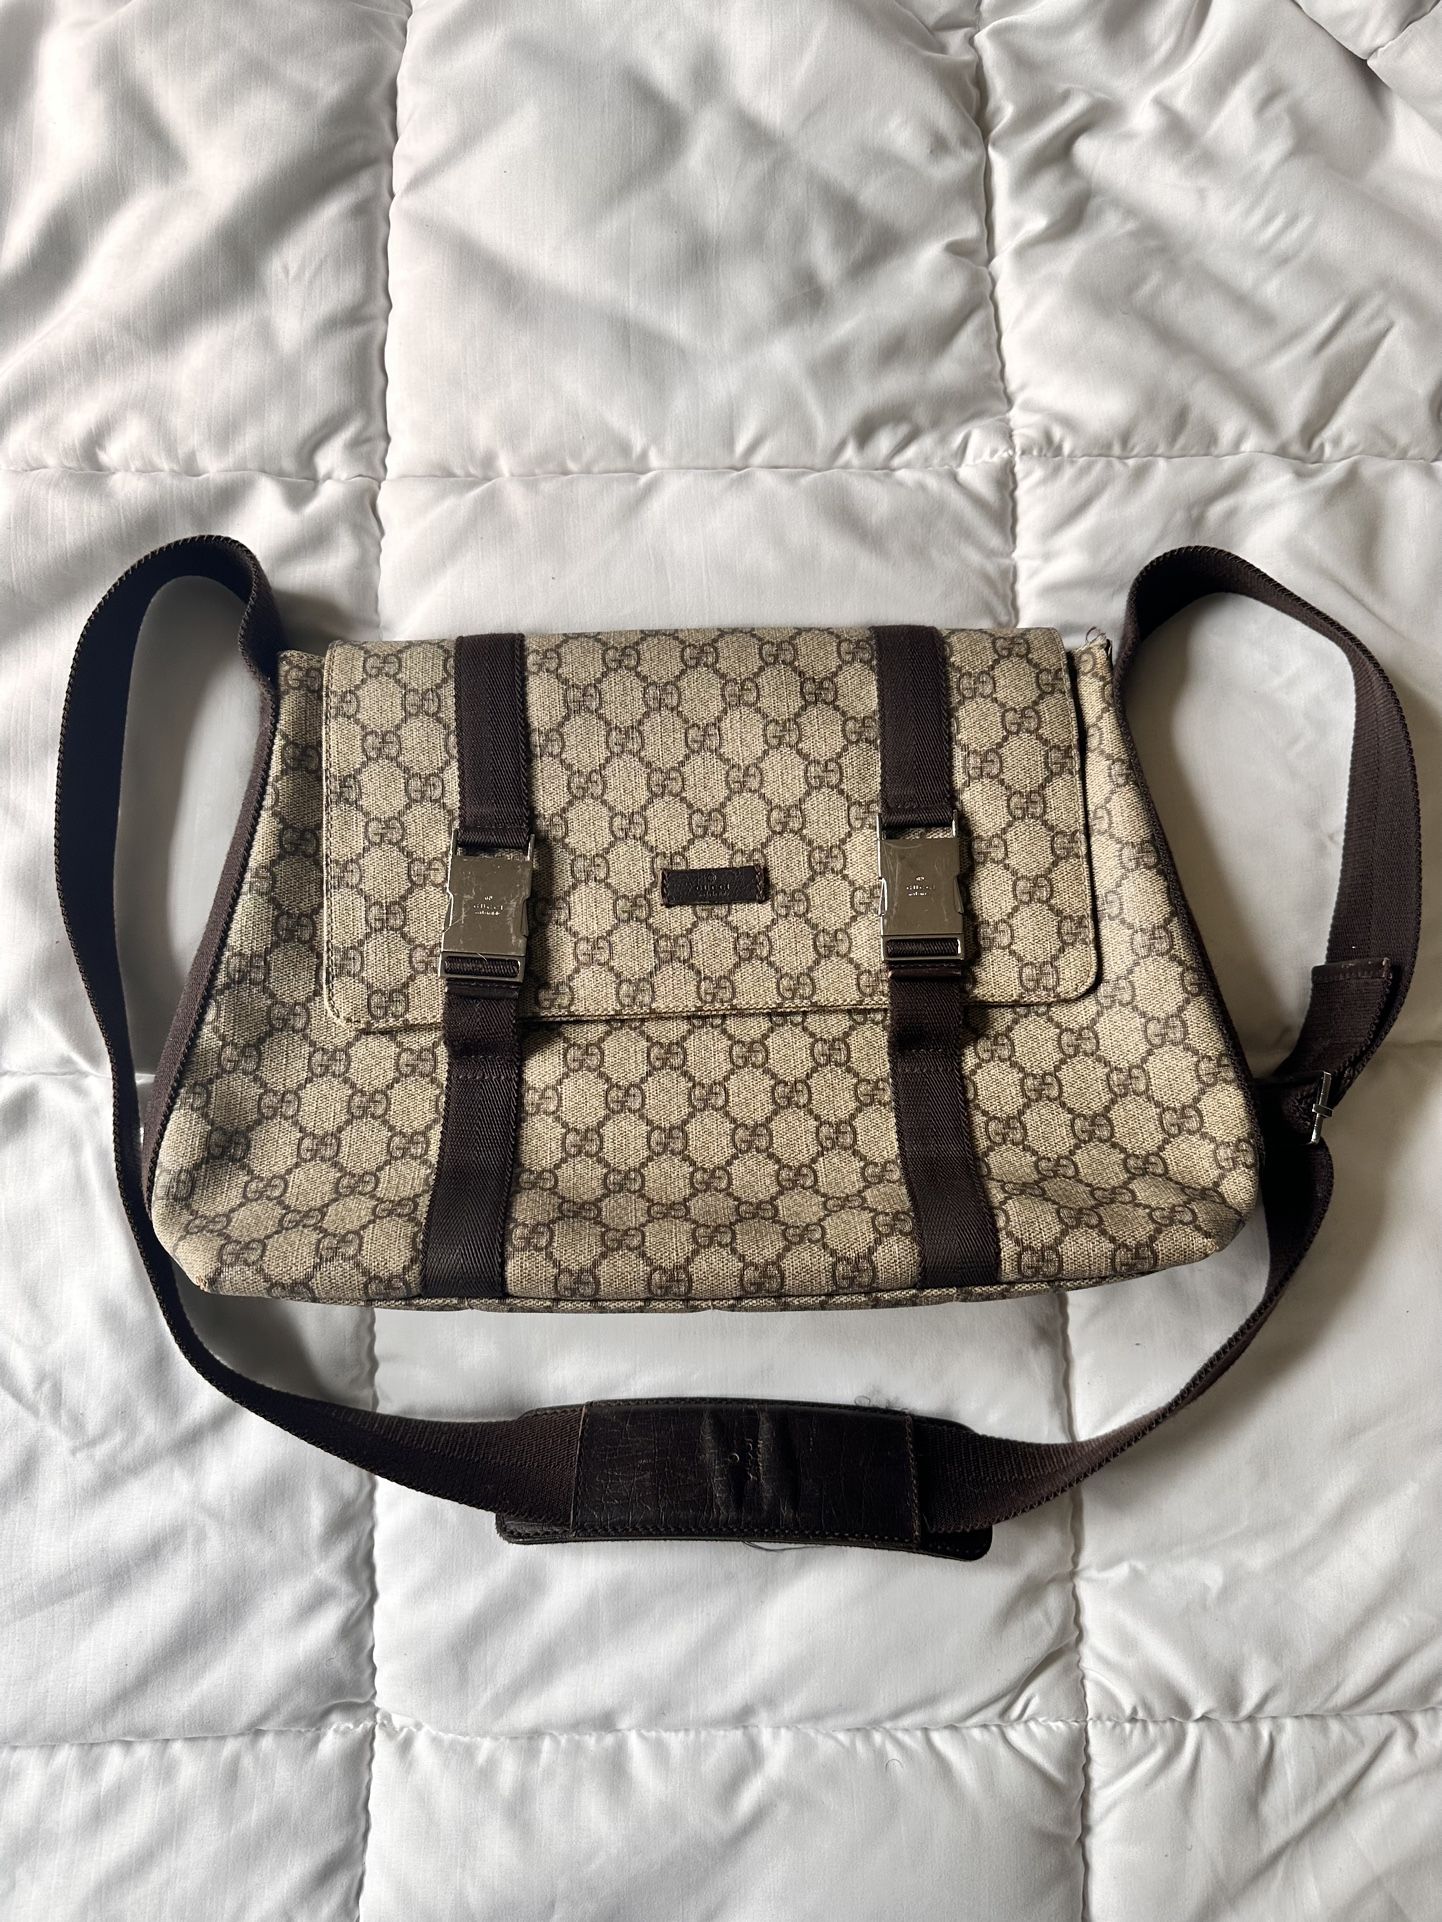 Gucci messenger bag for Sale in New York, NY - OfferUp